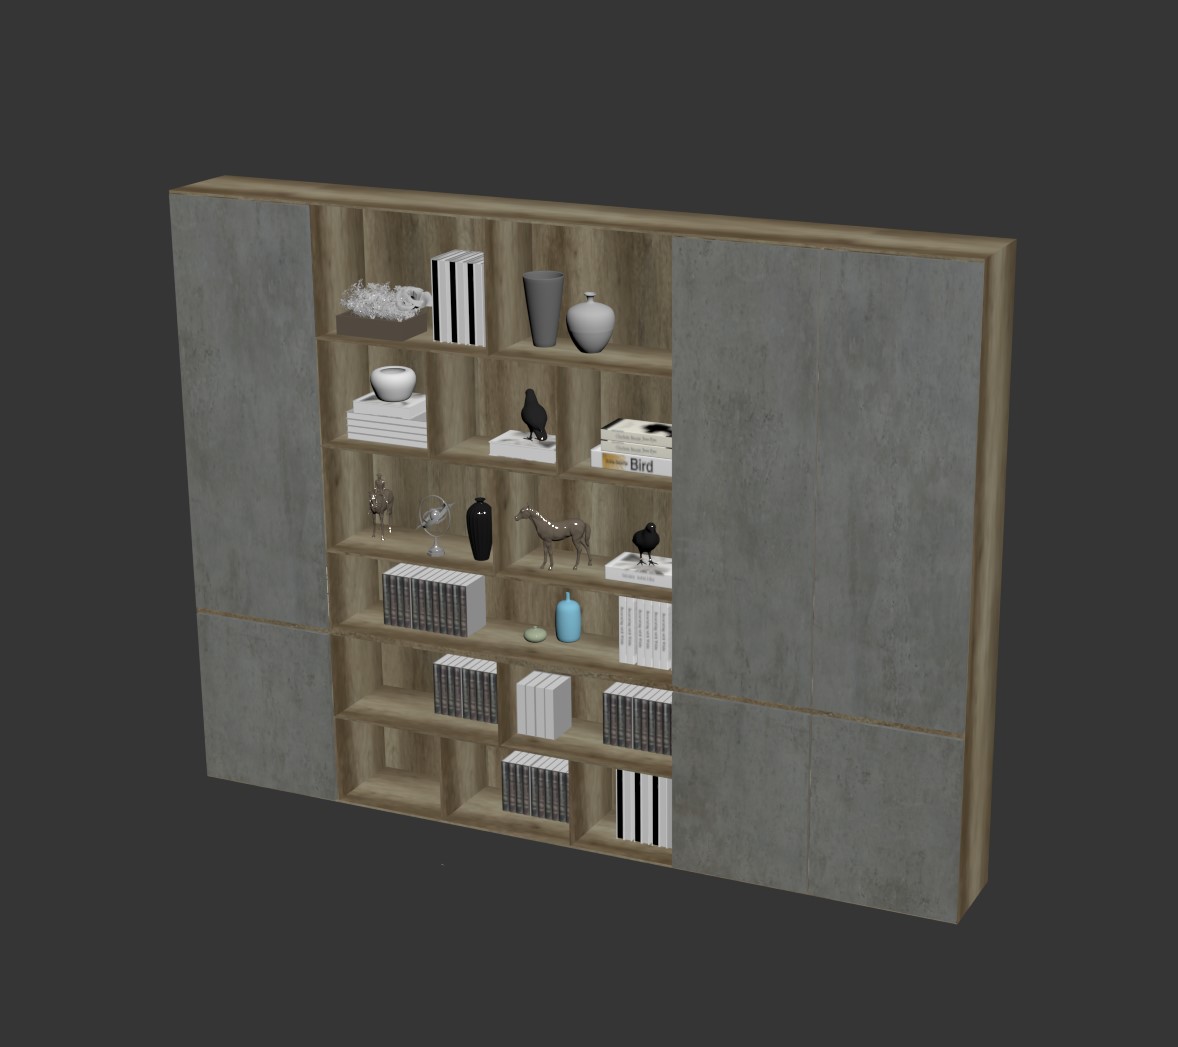 9995. Download Free Book Cabinets Model by Nguyen Huu Cong